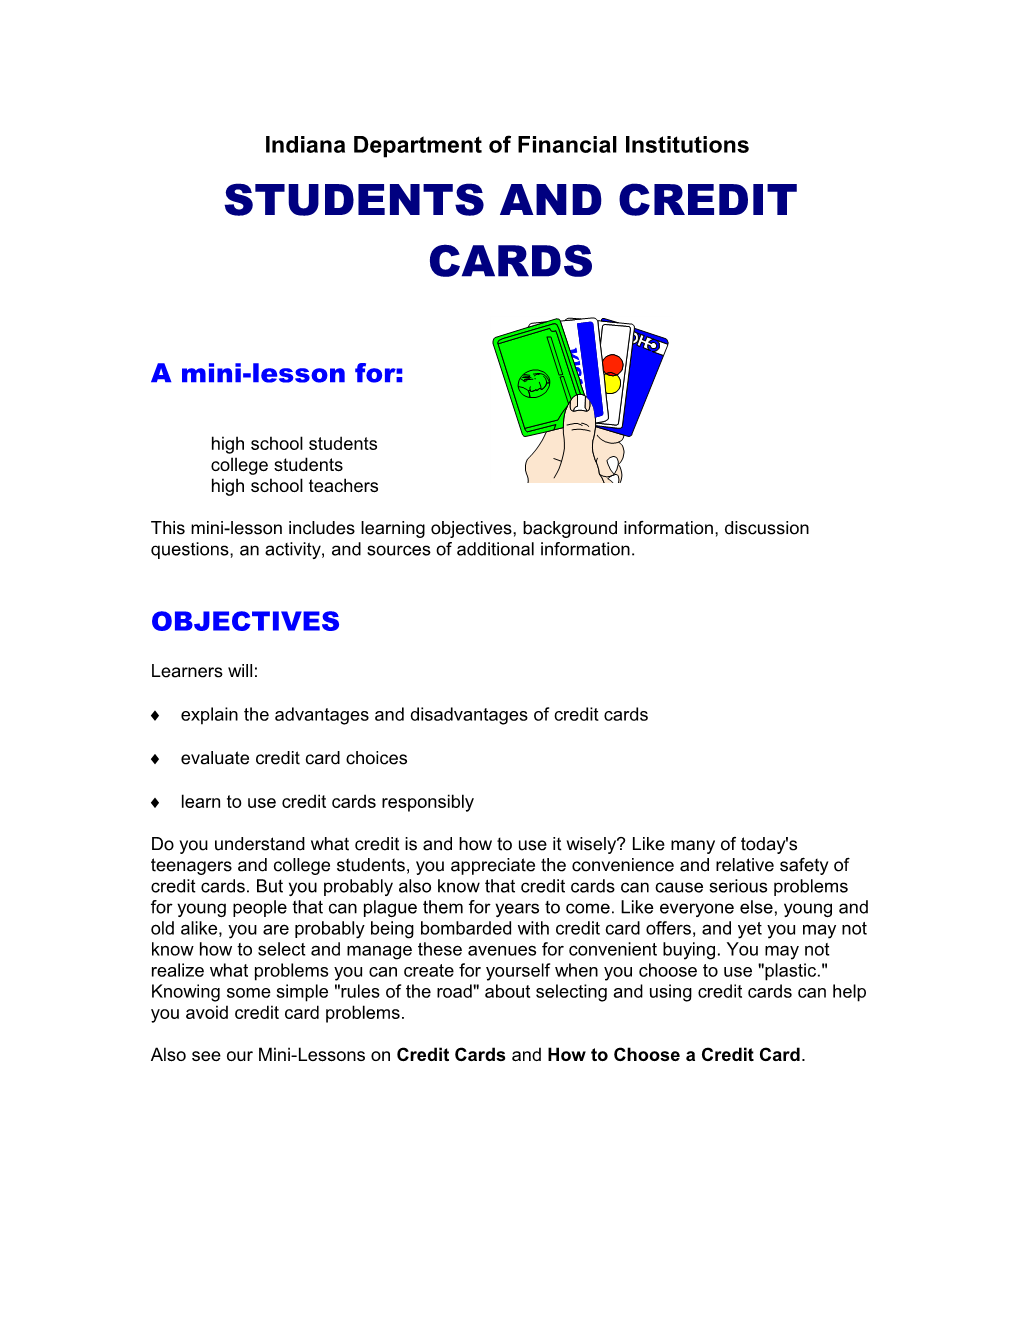 Students and Credit Cards